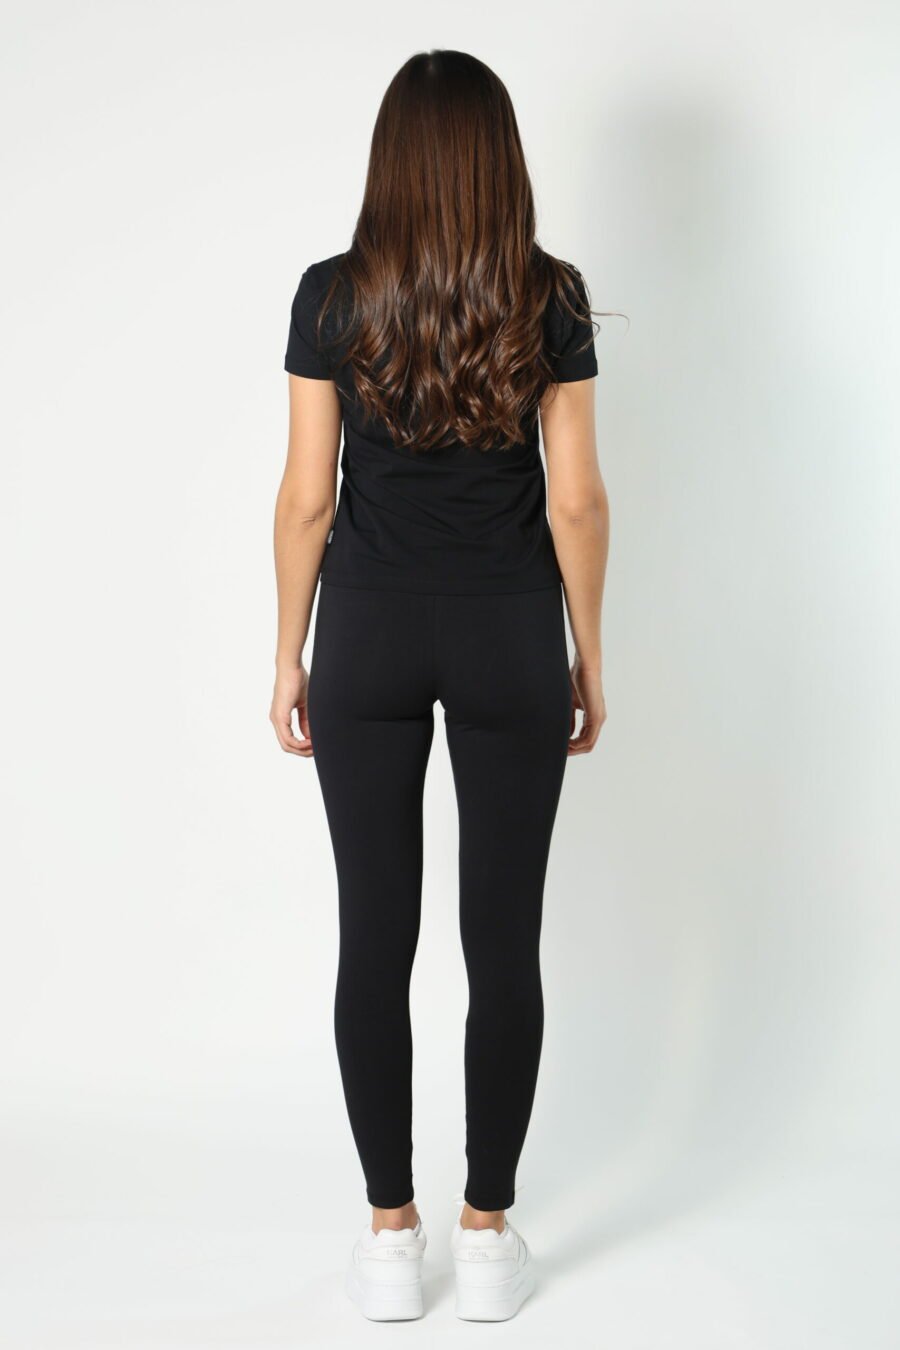 Tracksuit bottoms black with logo on waistband - 8052865435499 57 scaled